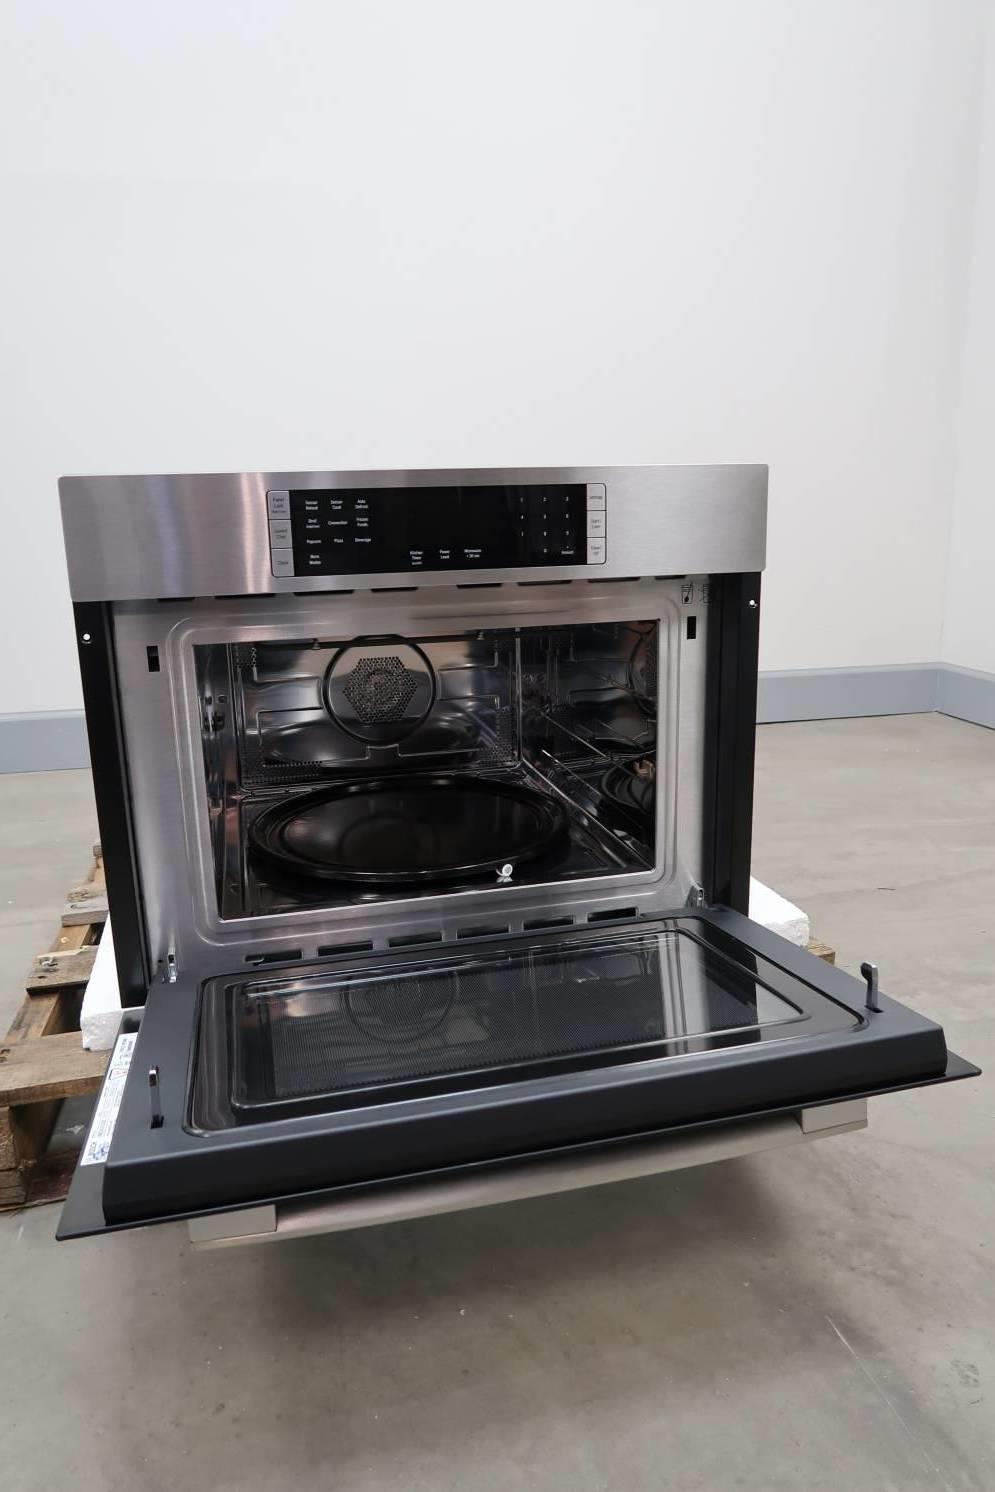 HMC54151UC1 by Bosch - 500 Series, 24 Speed / Convection